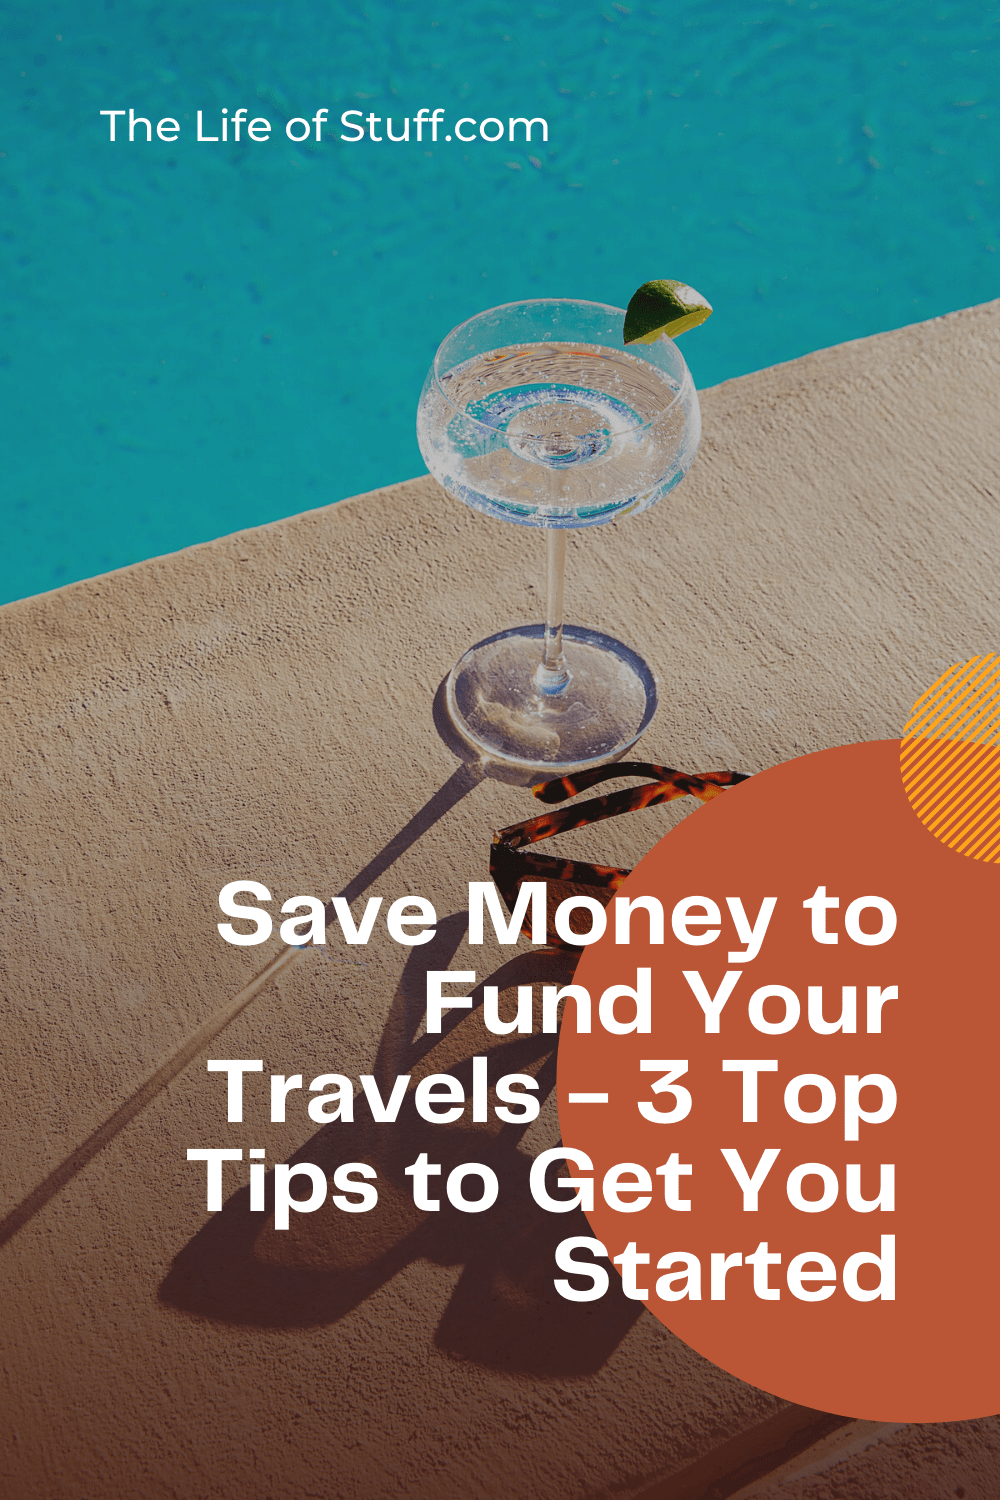 Save Money to Fund Your Travels - 3 Top Tips to Get You Started - The Life of Stuff